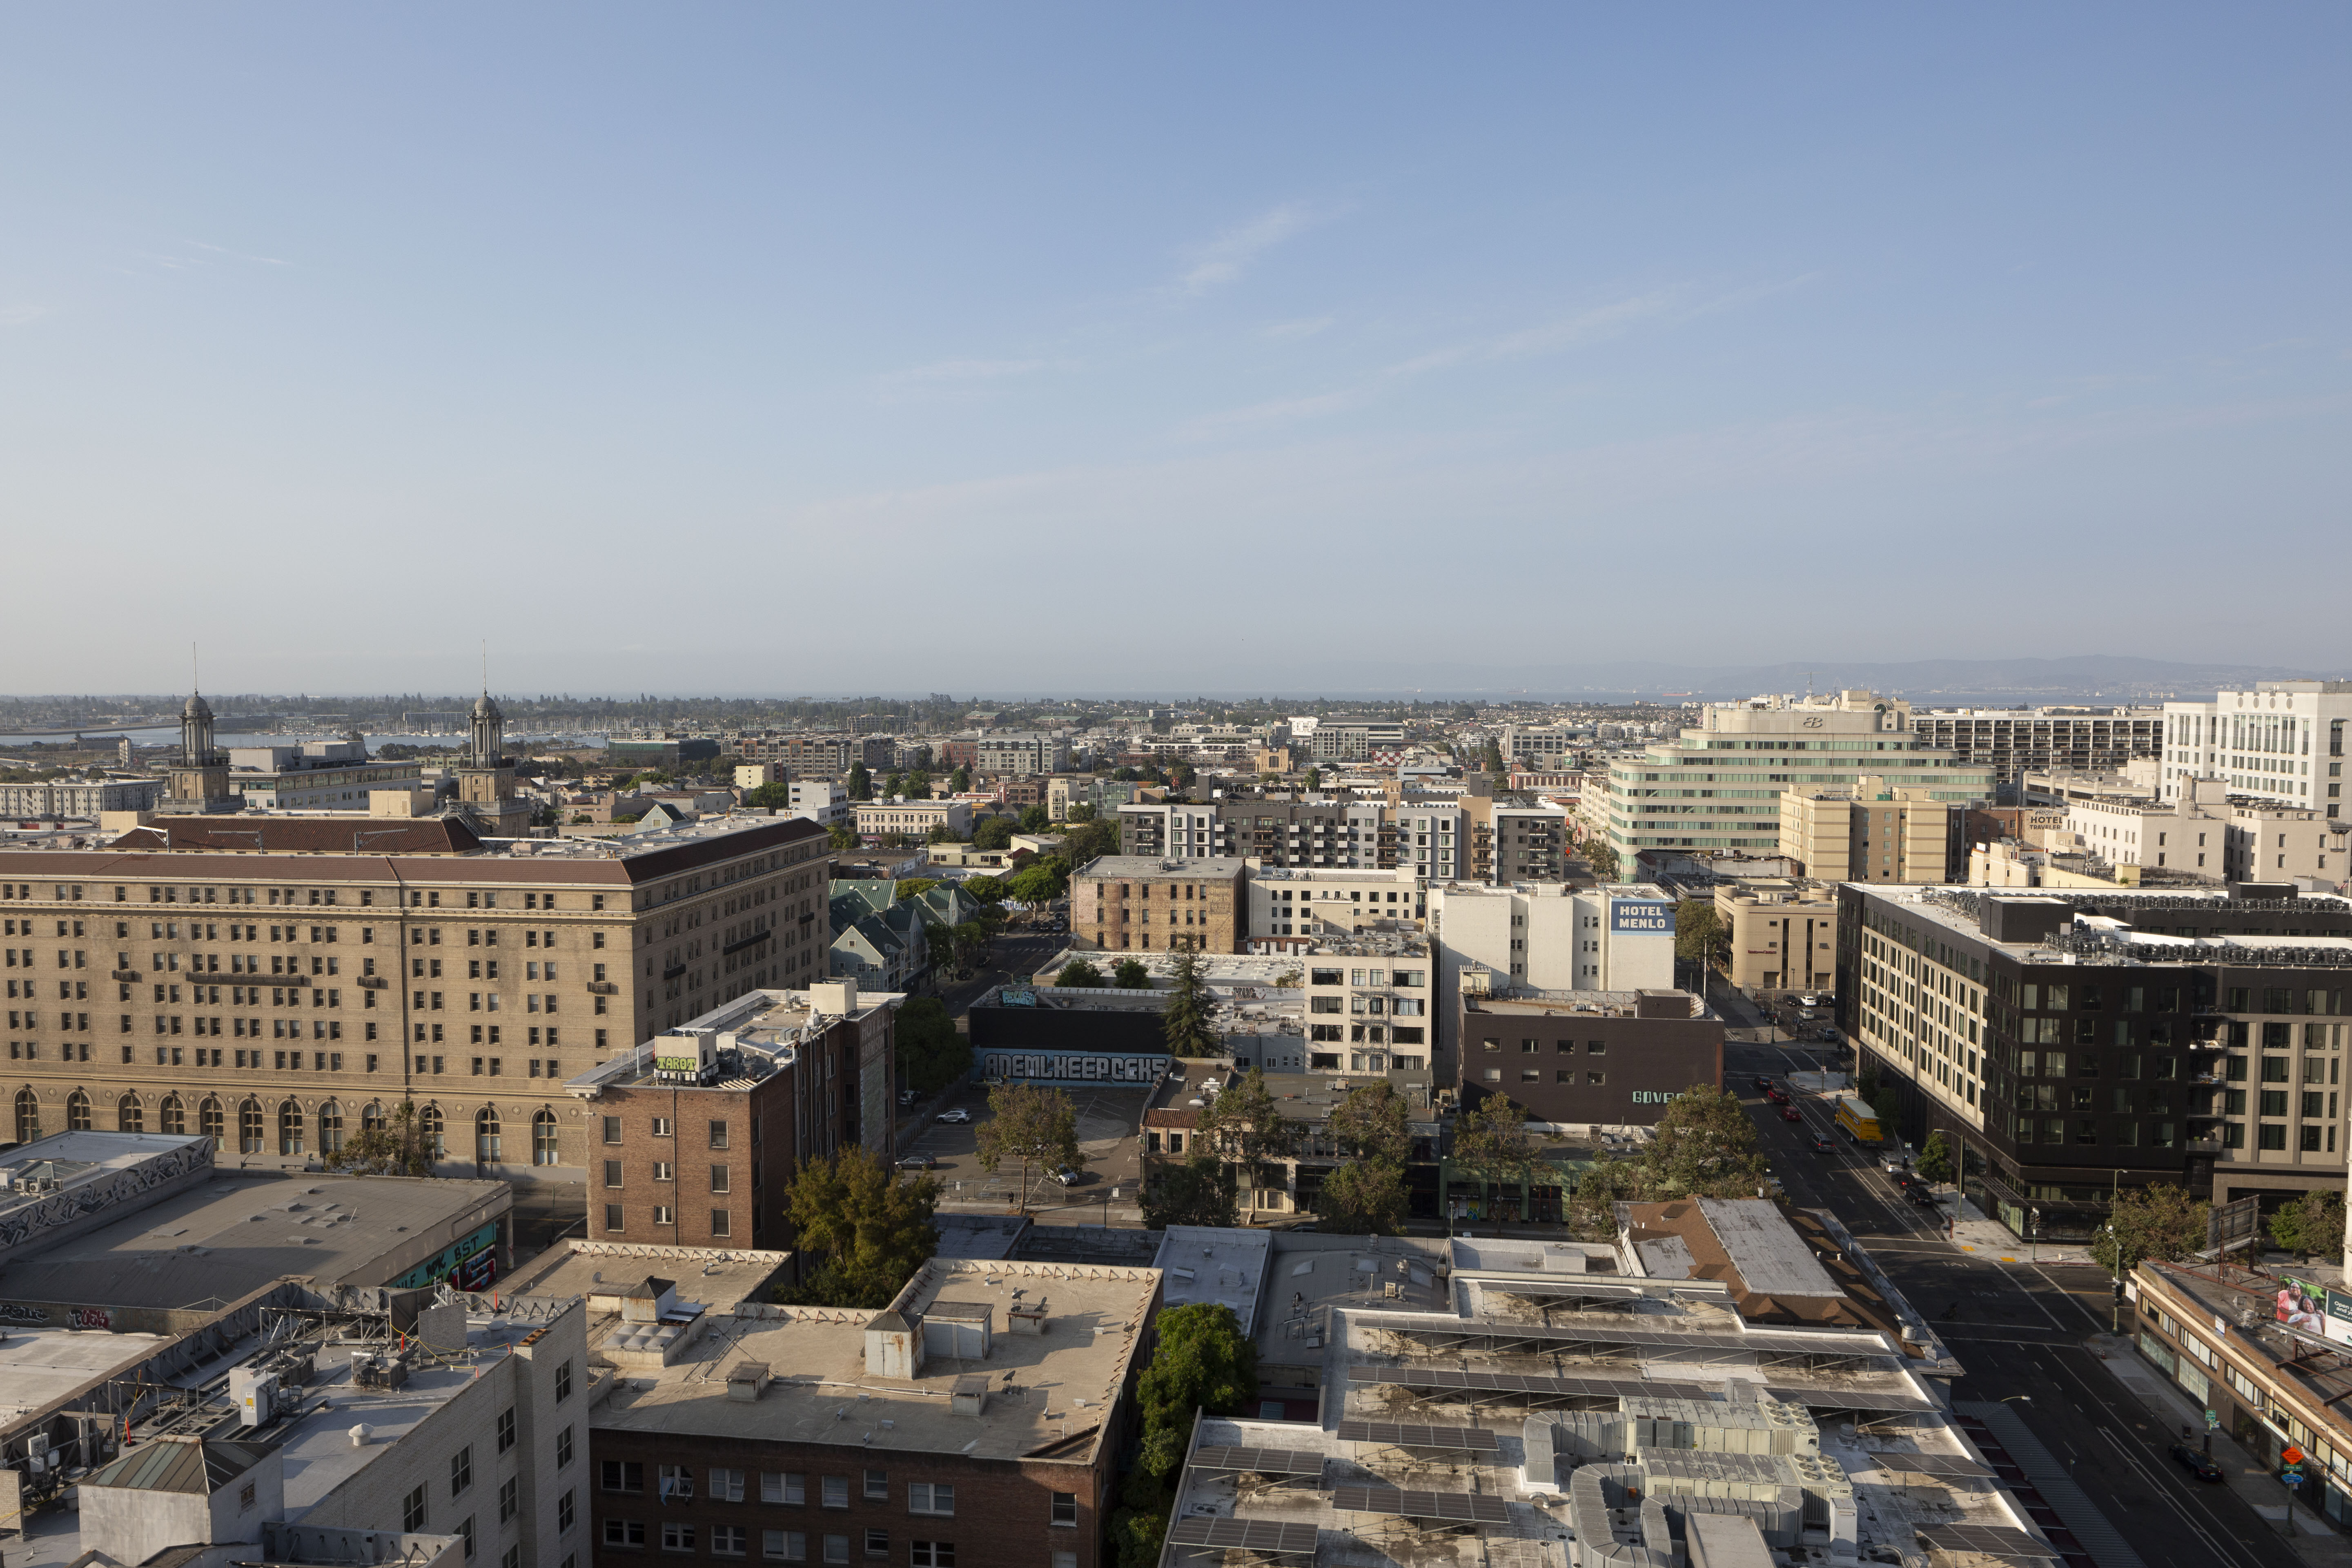 1510 Webster Street rooftop view looking south, image by Andrew Campbell Nelson